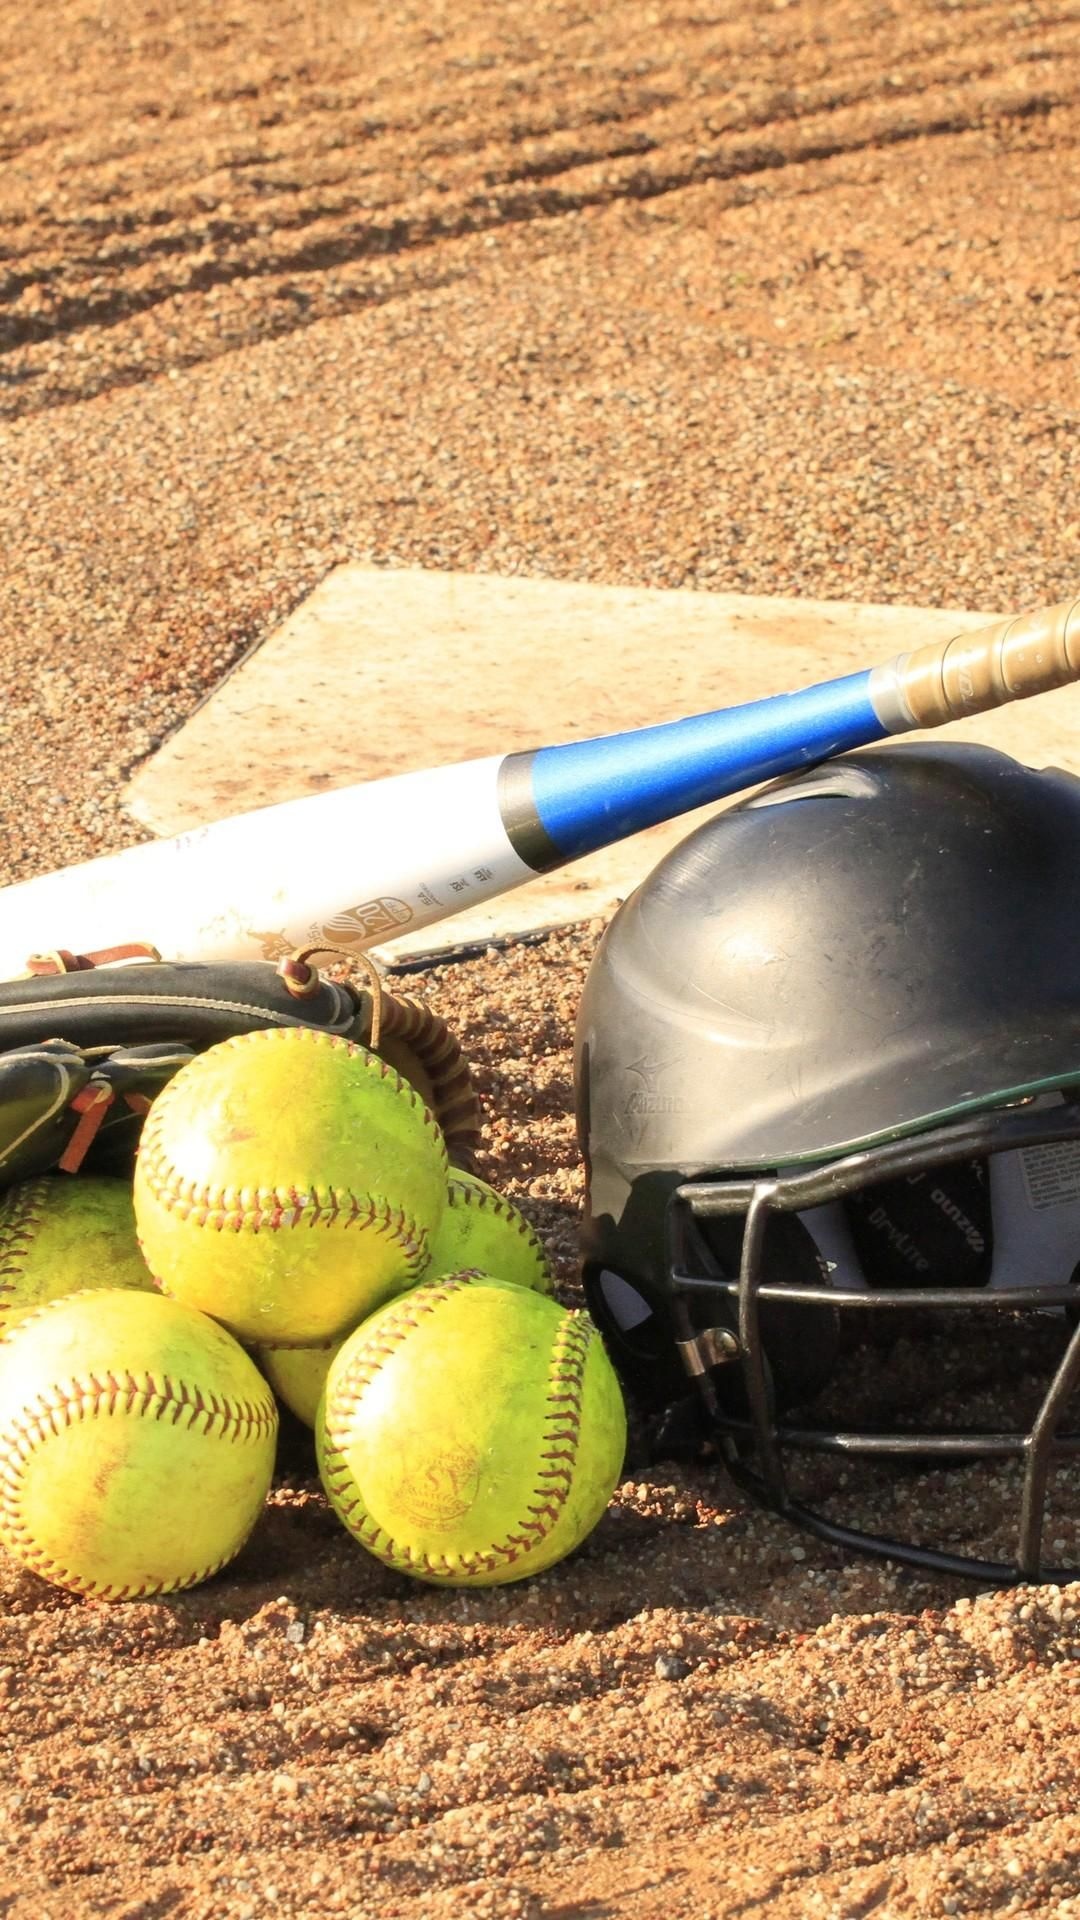 Softball: A bat-and-ball sports discipline, Competitive sports equipment. 1080x1920 Full HD Background.